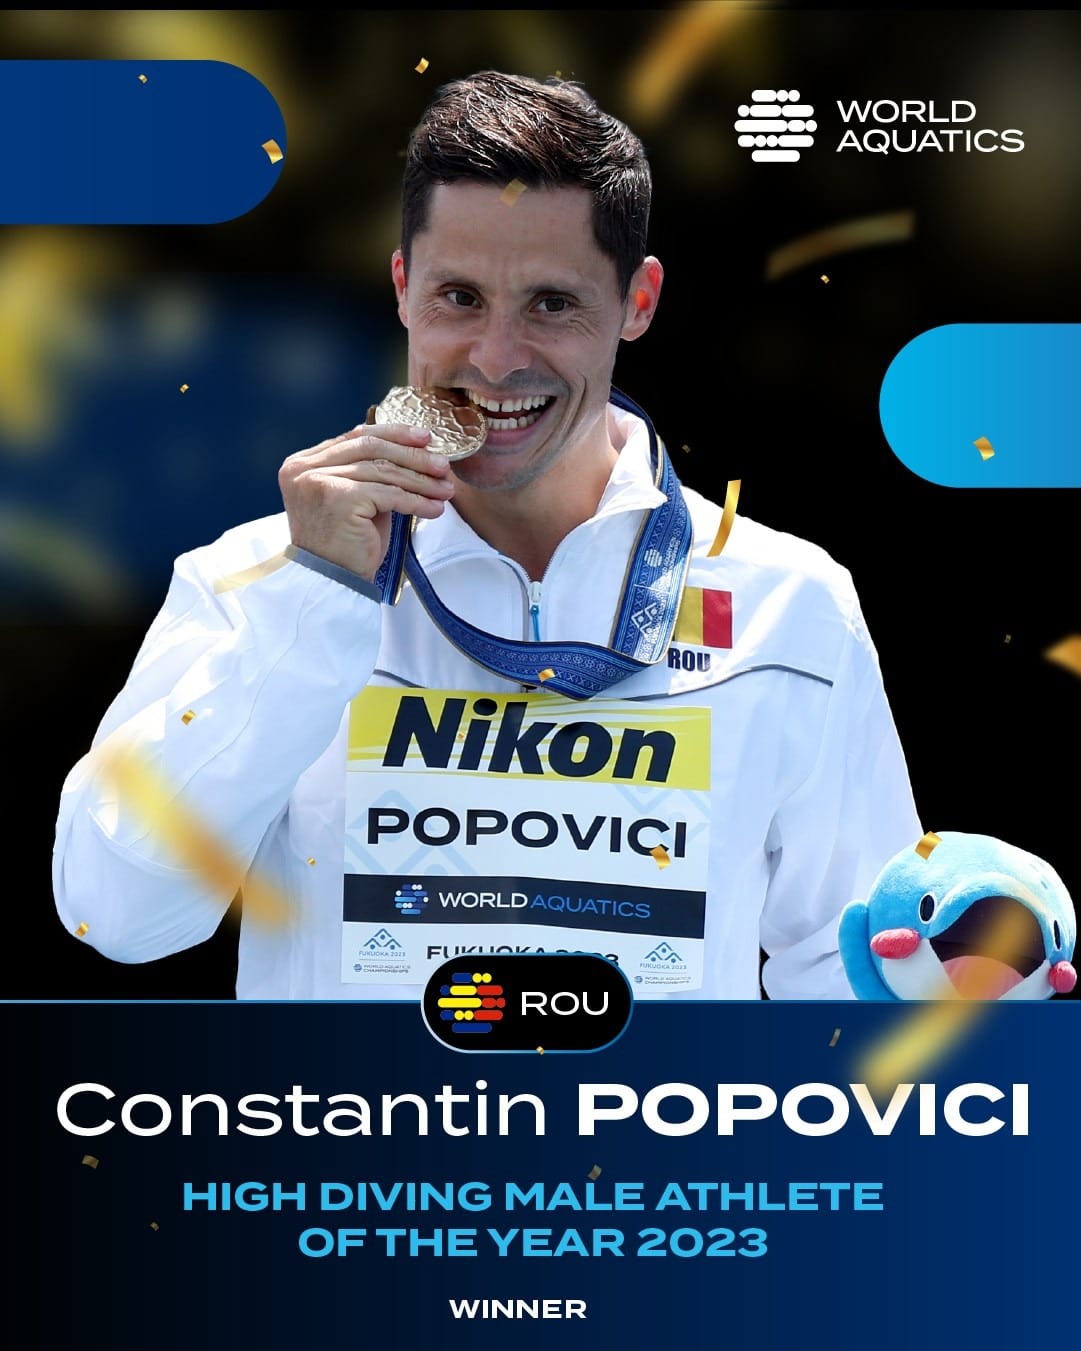 Romania’s Constantin Popovici named high-diving athlete of 2023